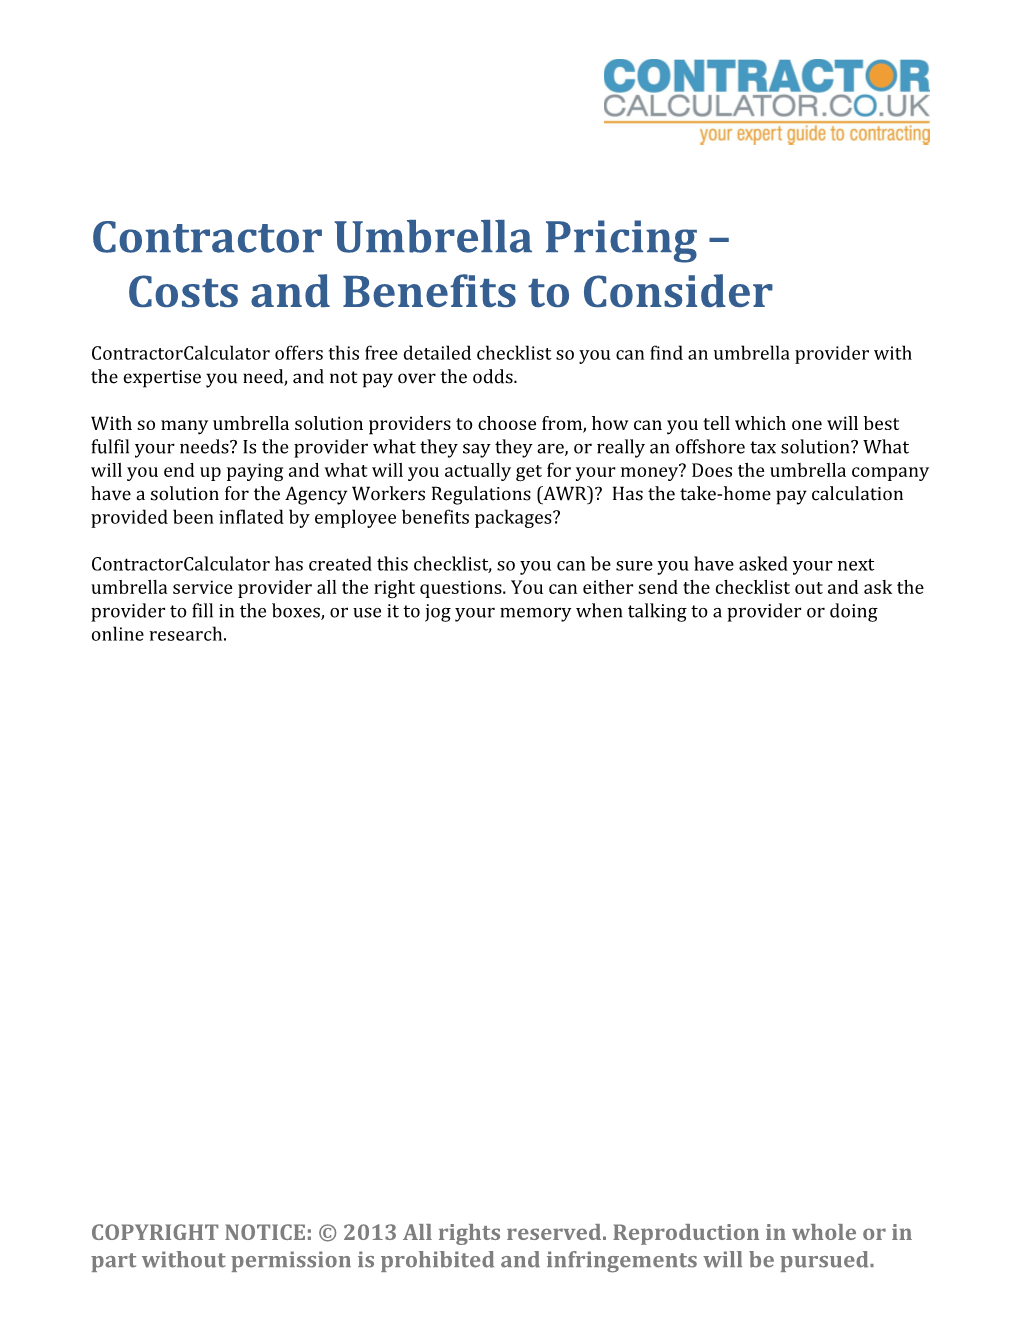 Contractor Umbrella Pricing Costs and Benefits to Consider